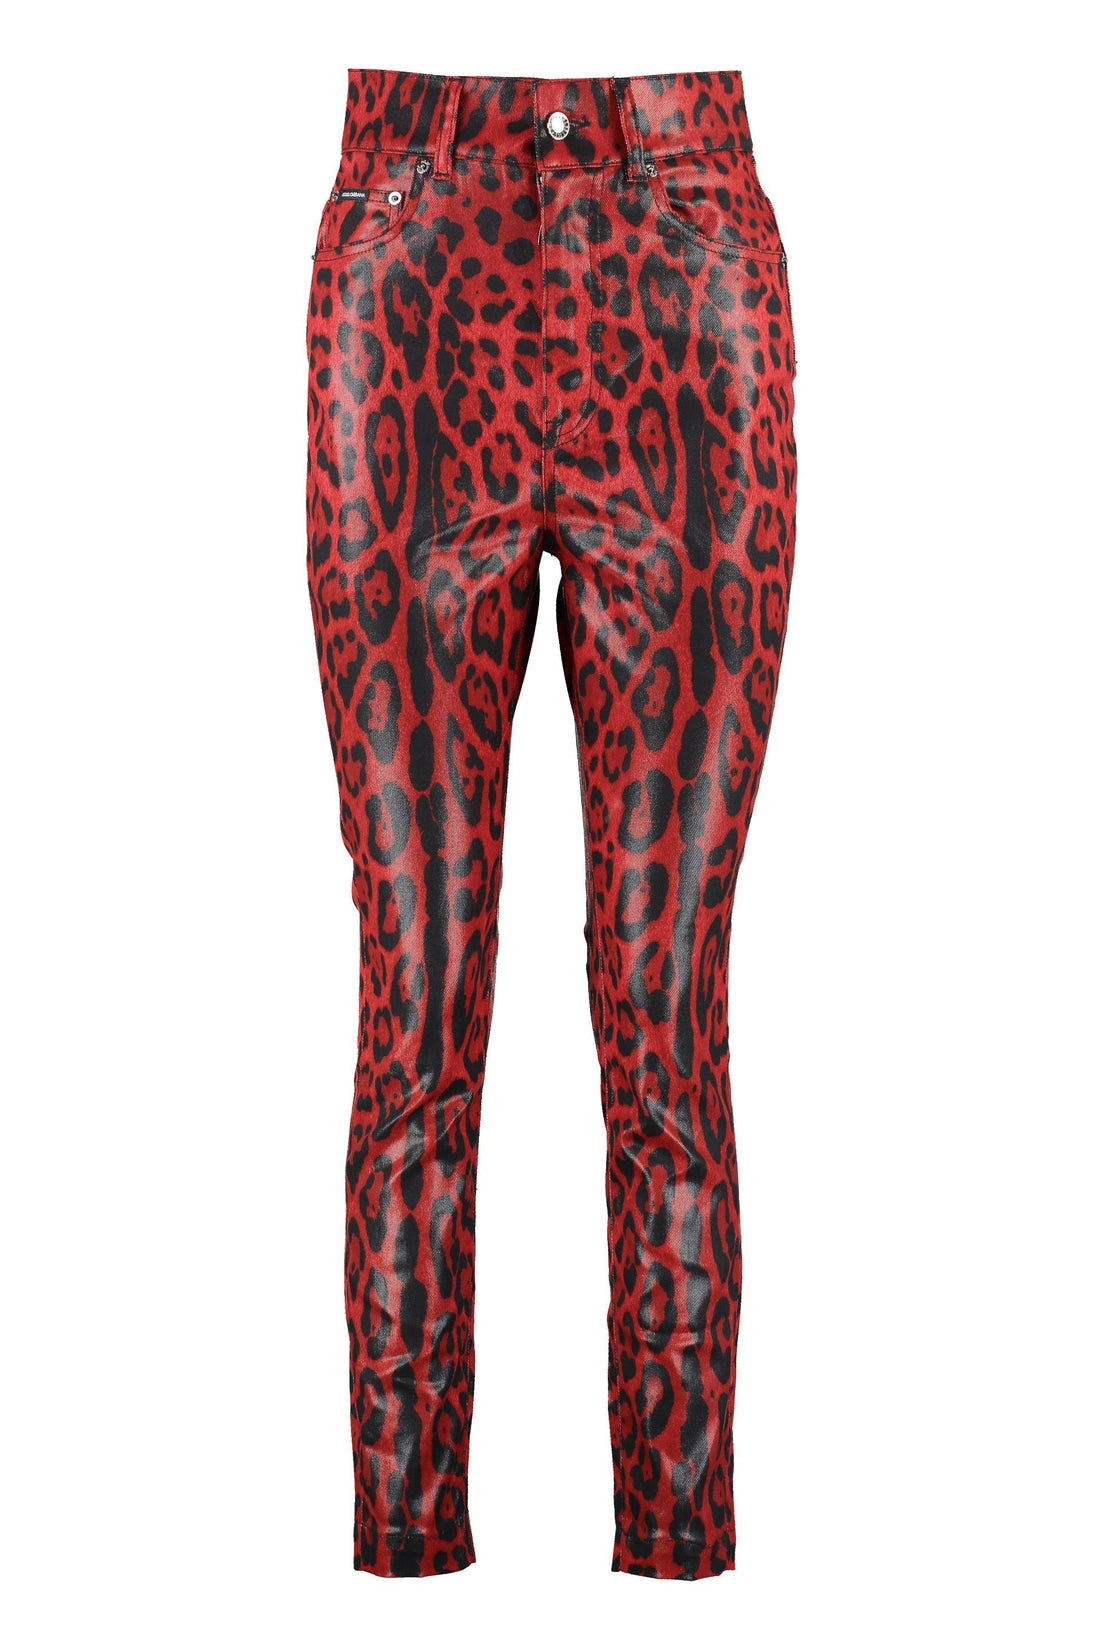 Dolce & Gabbana-OUTLET-SALE-Printed skinny fit jeans-ARCHIVIST